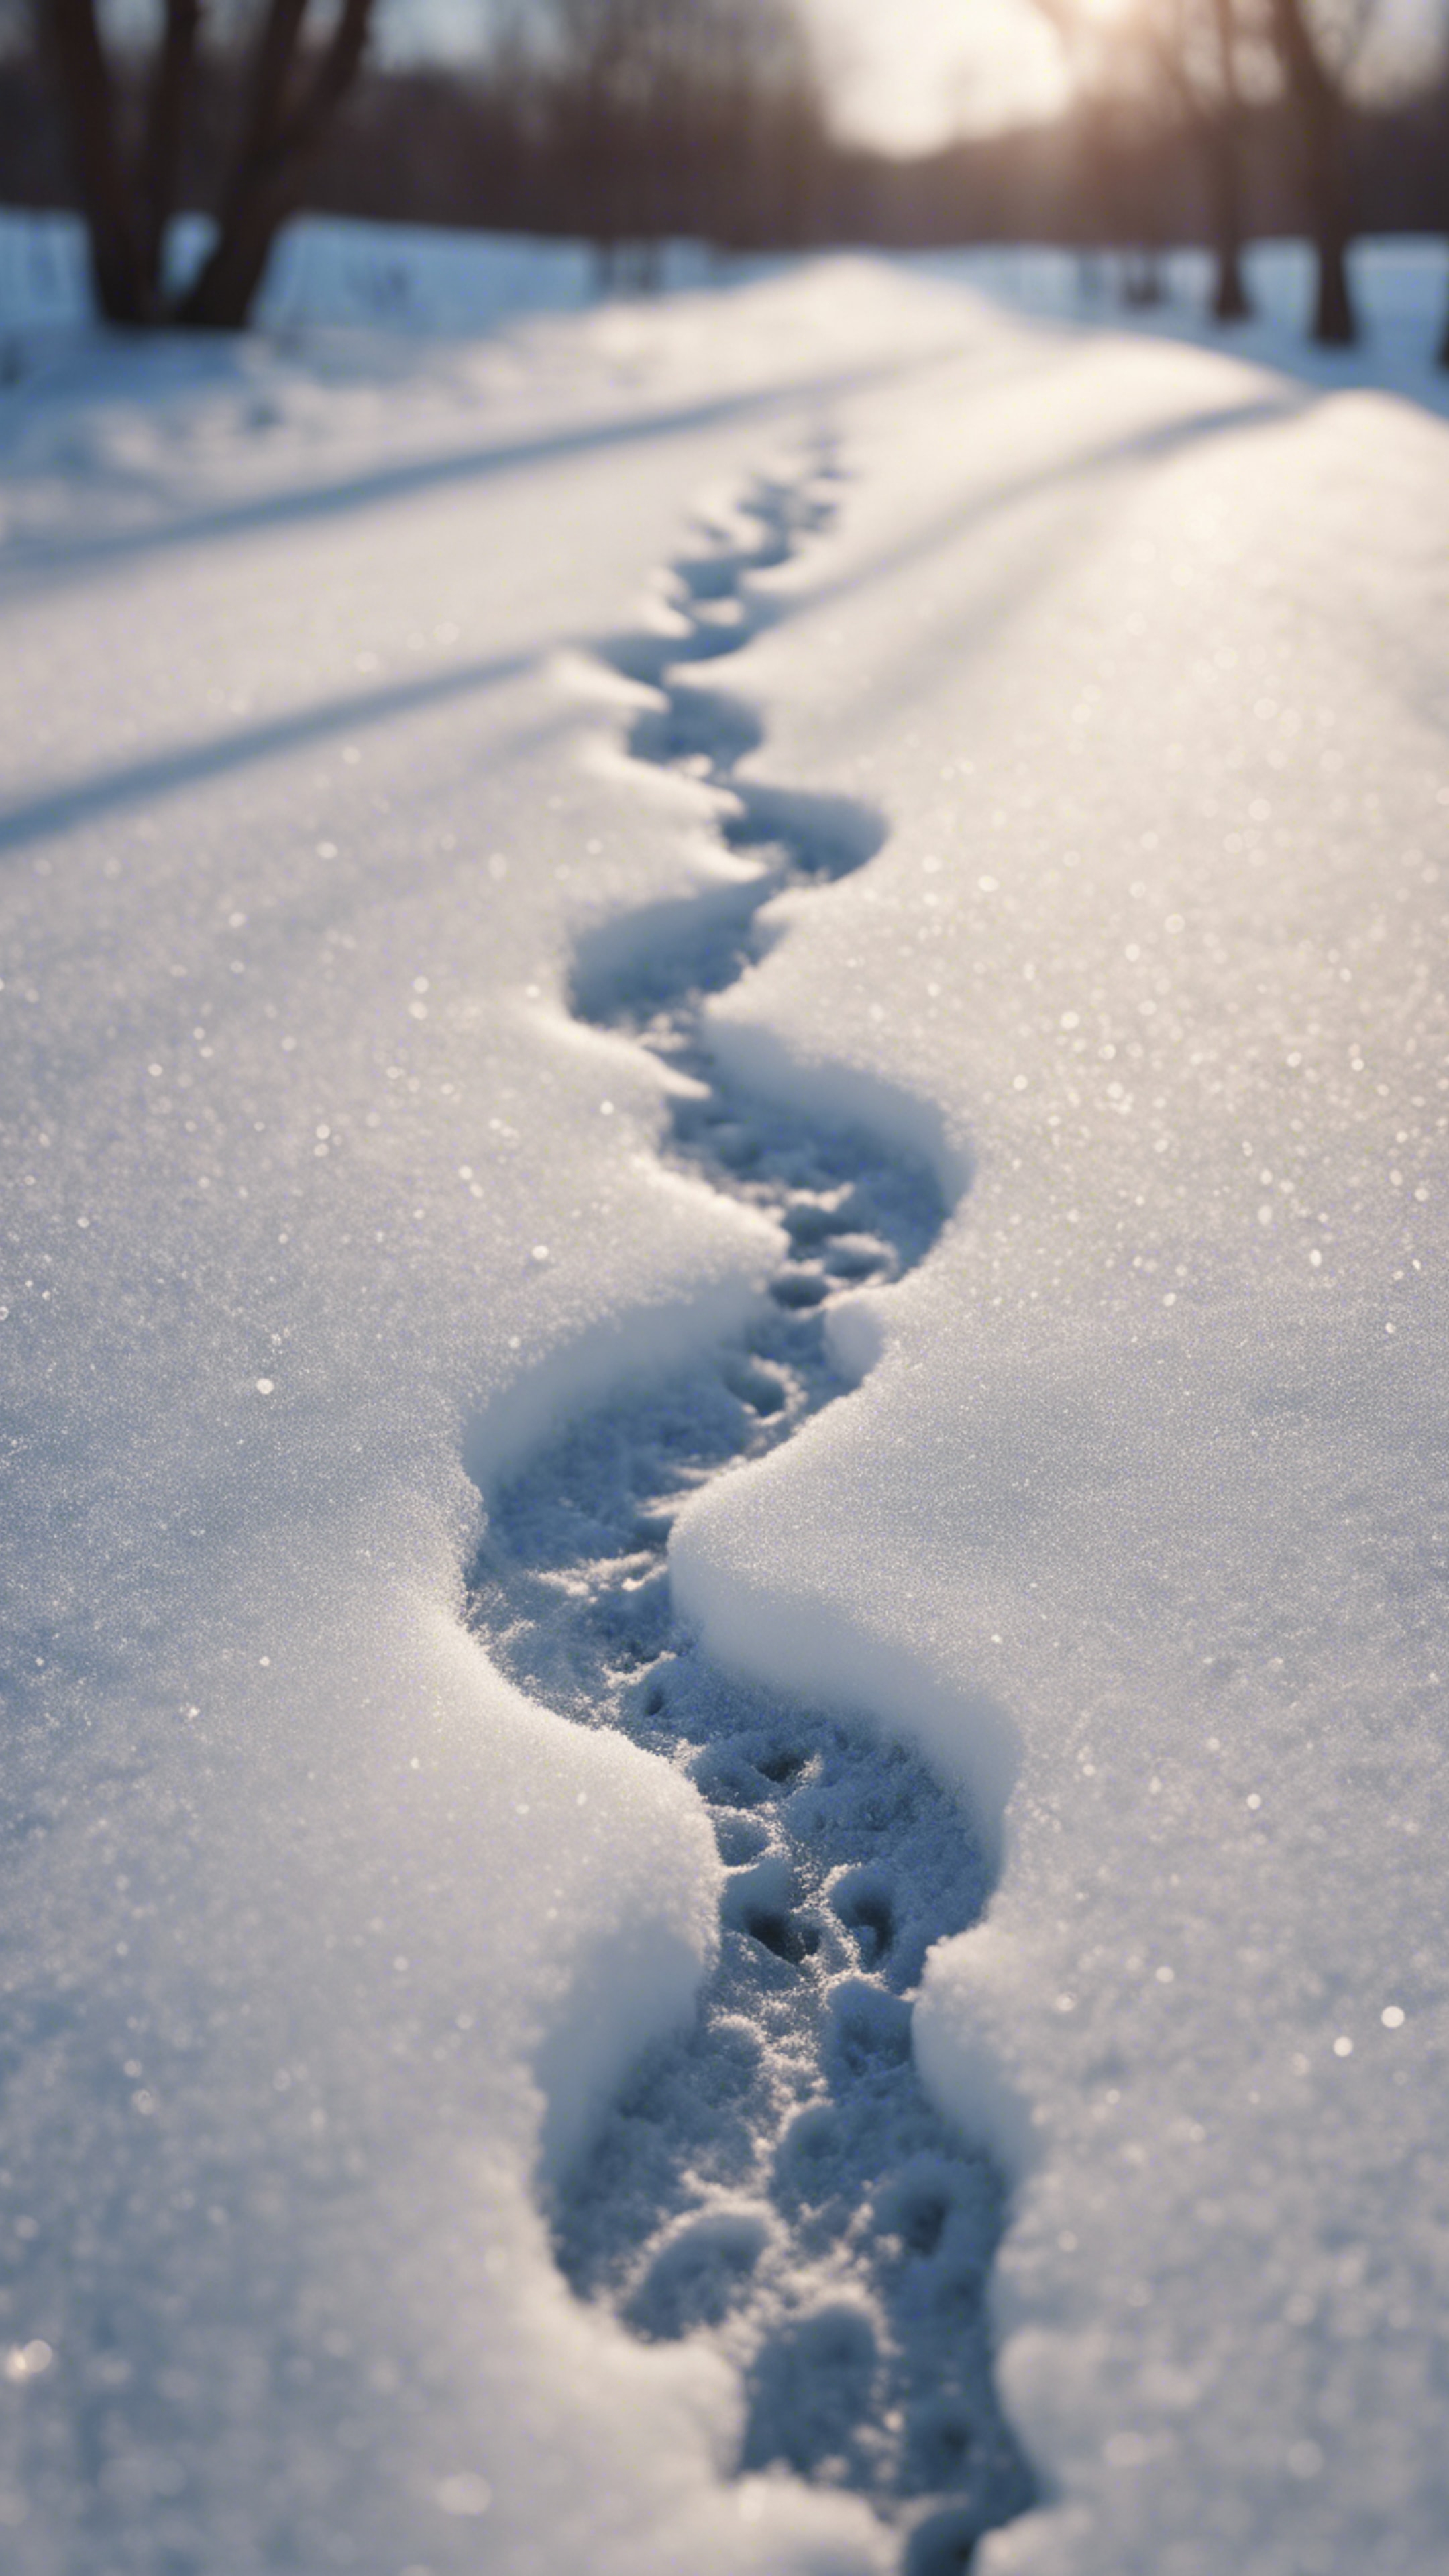 A pair of frosty, heart-shaped footprints imprinted on a snow-covered lane, symbolizing love in winter. 벽지[a9223da6c59742c6a00f]